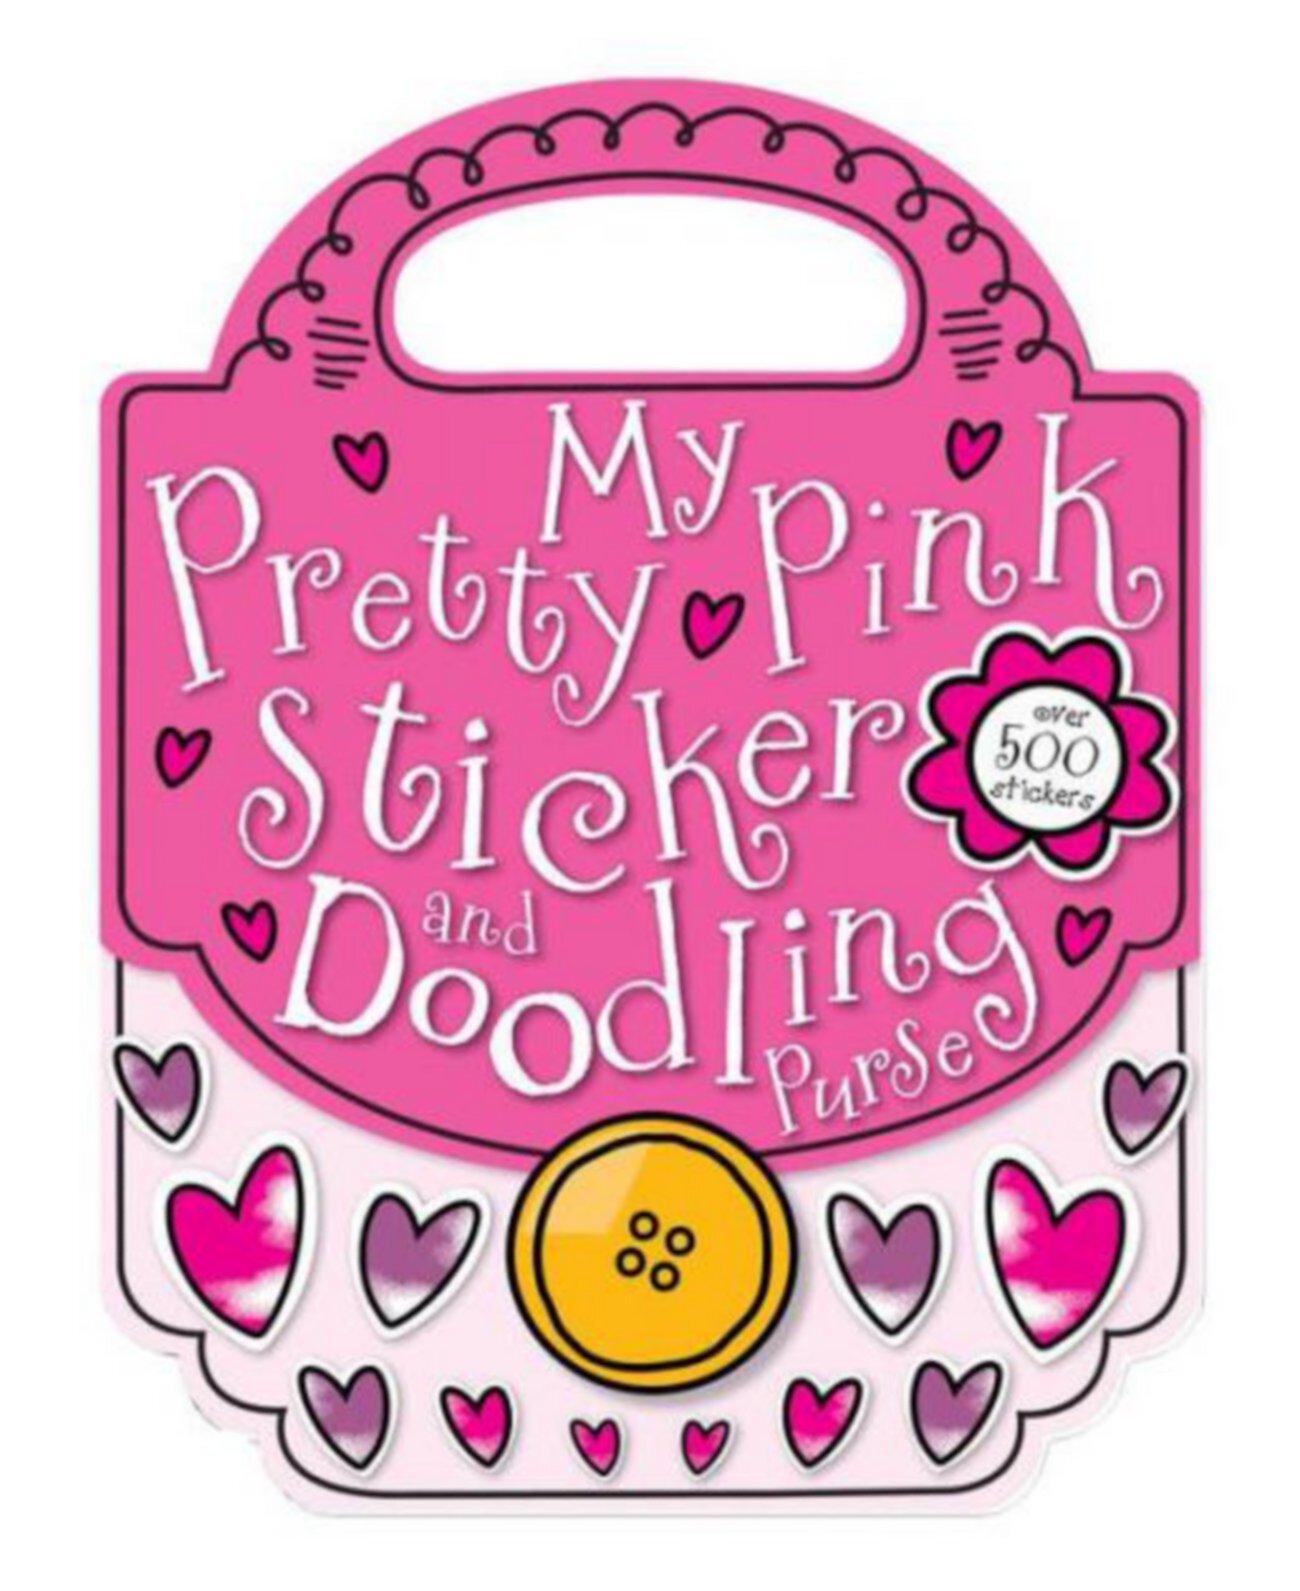 My pretty. My pretty Pink Sticker Bag. Coin Bag Doodle.